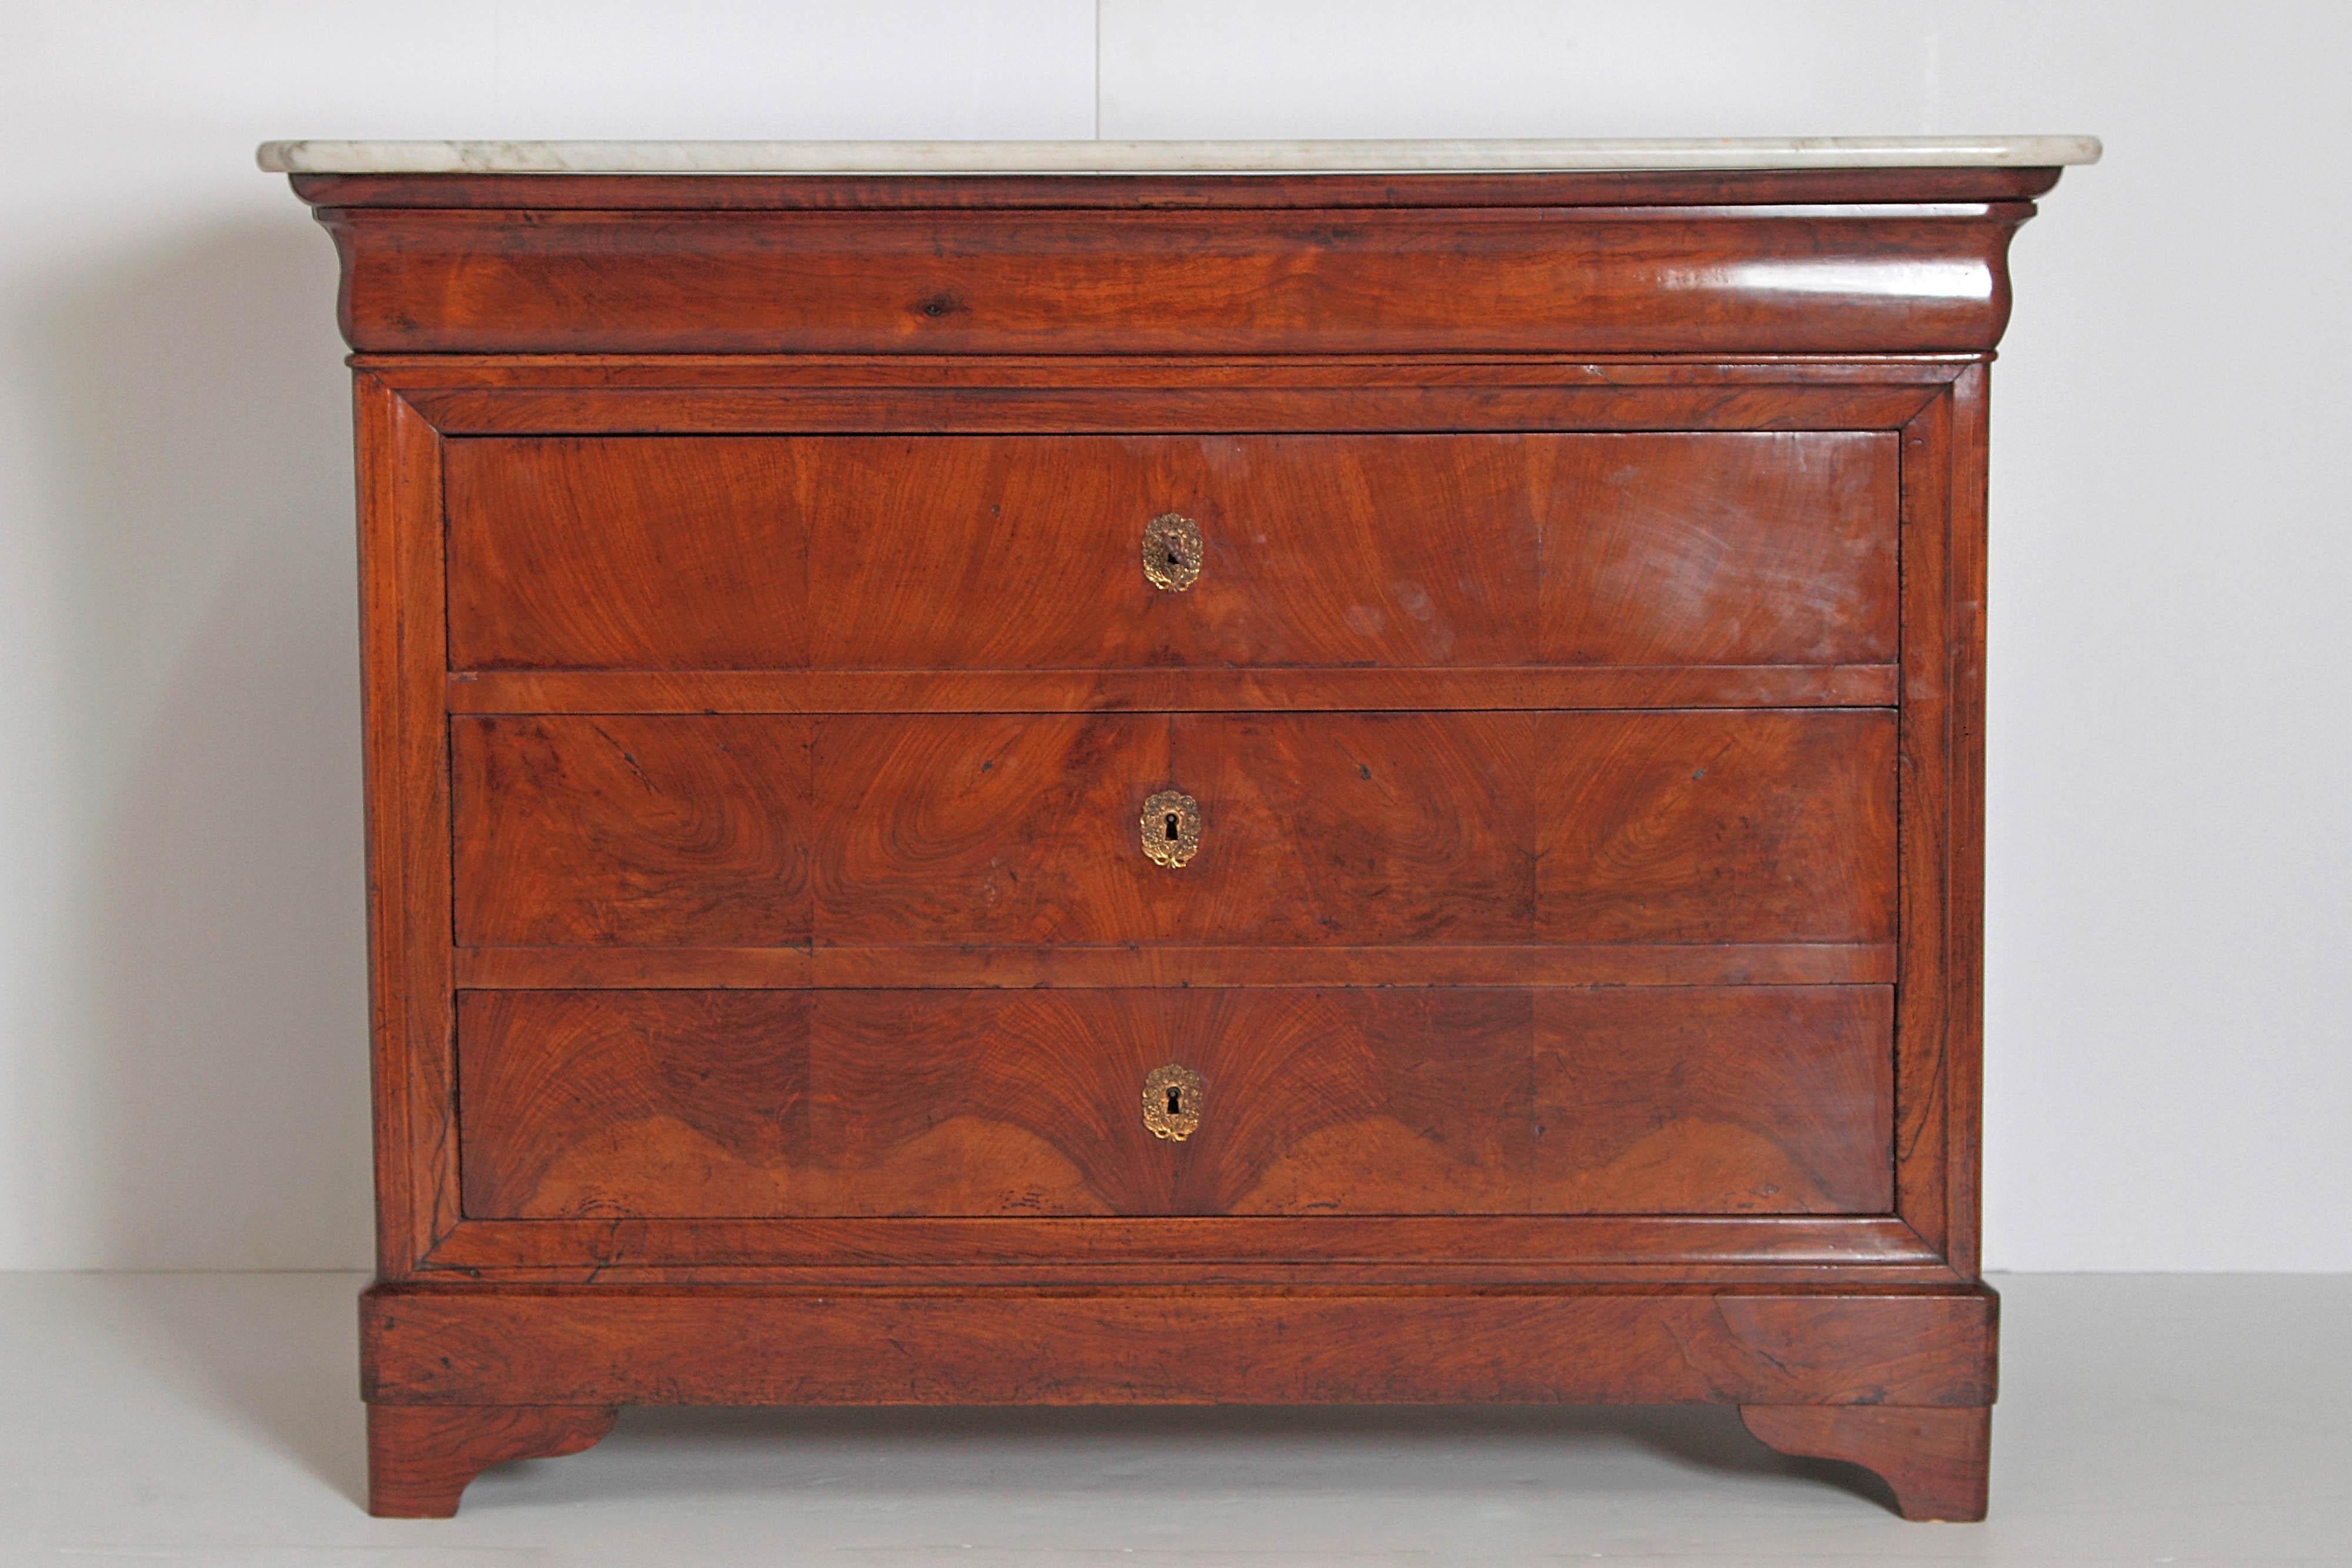 A 19th century French Charles X chest of drawers or commode with simple yet elegant lines. It has a white marble top with a base of mahogany with a shaped frieze over three drawers. Each drawer has its own working lock and comes with one key, 19th